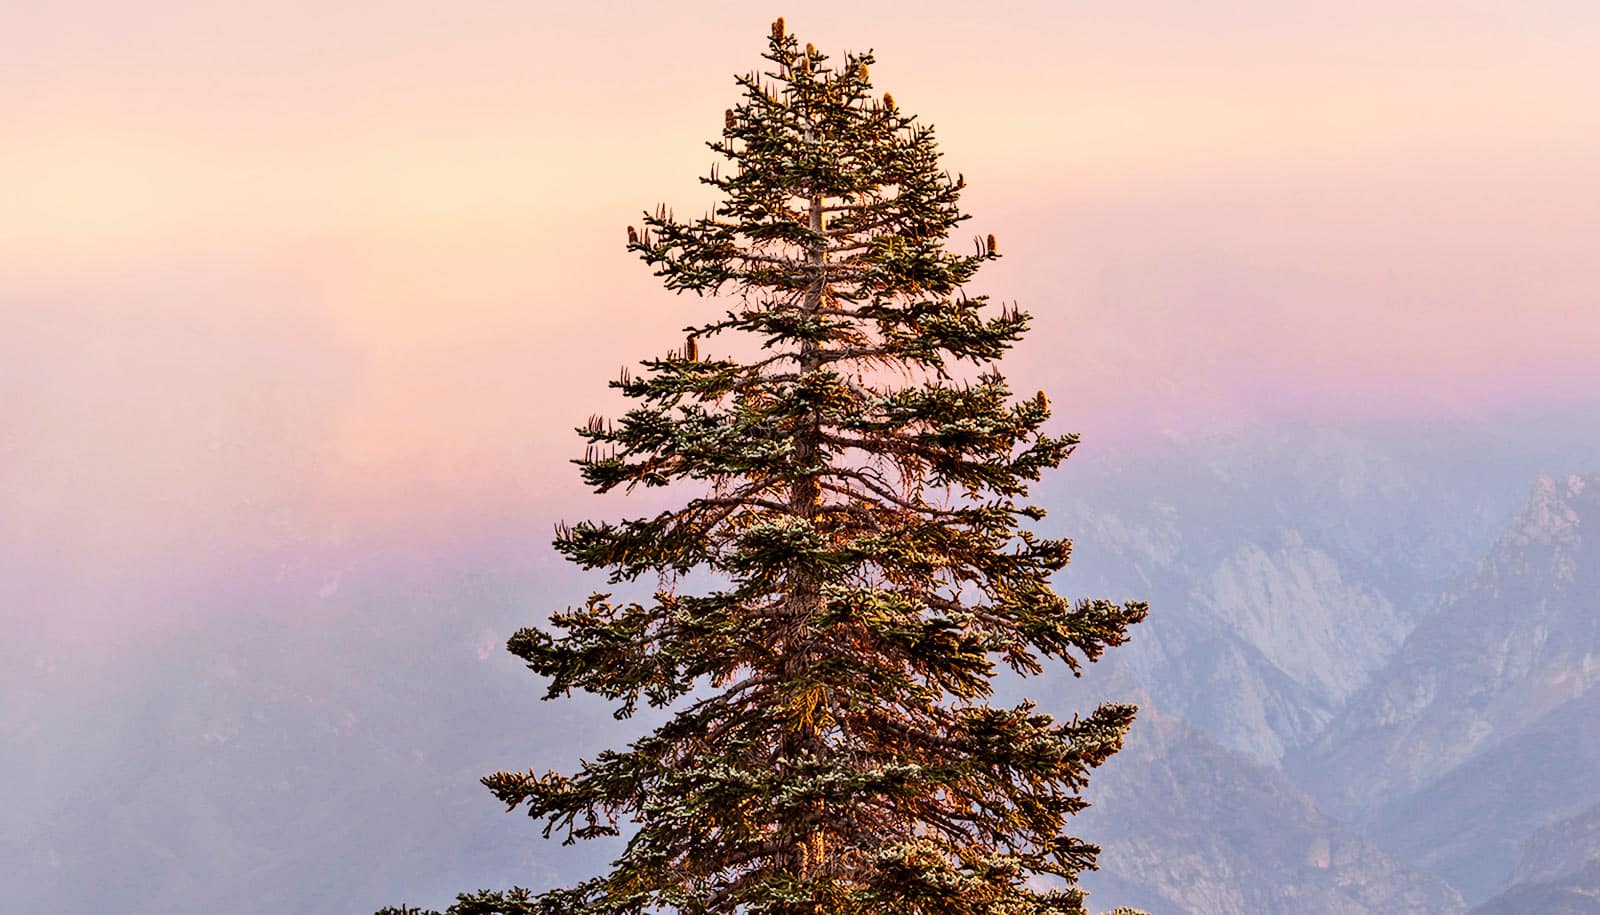 A single conifer tree with mountains and a sunrise lighting up the sky in the background.